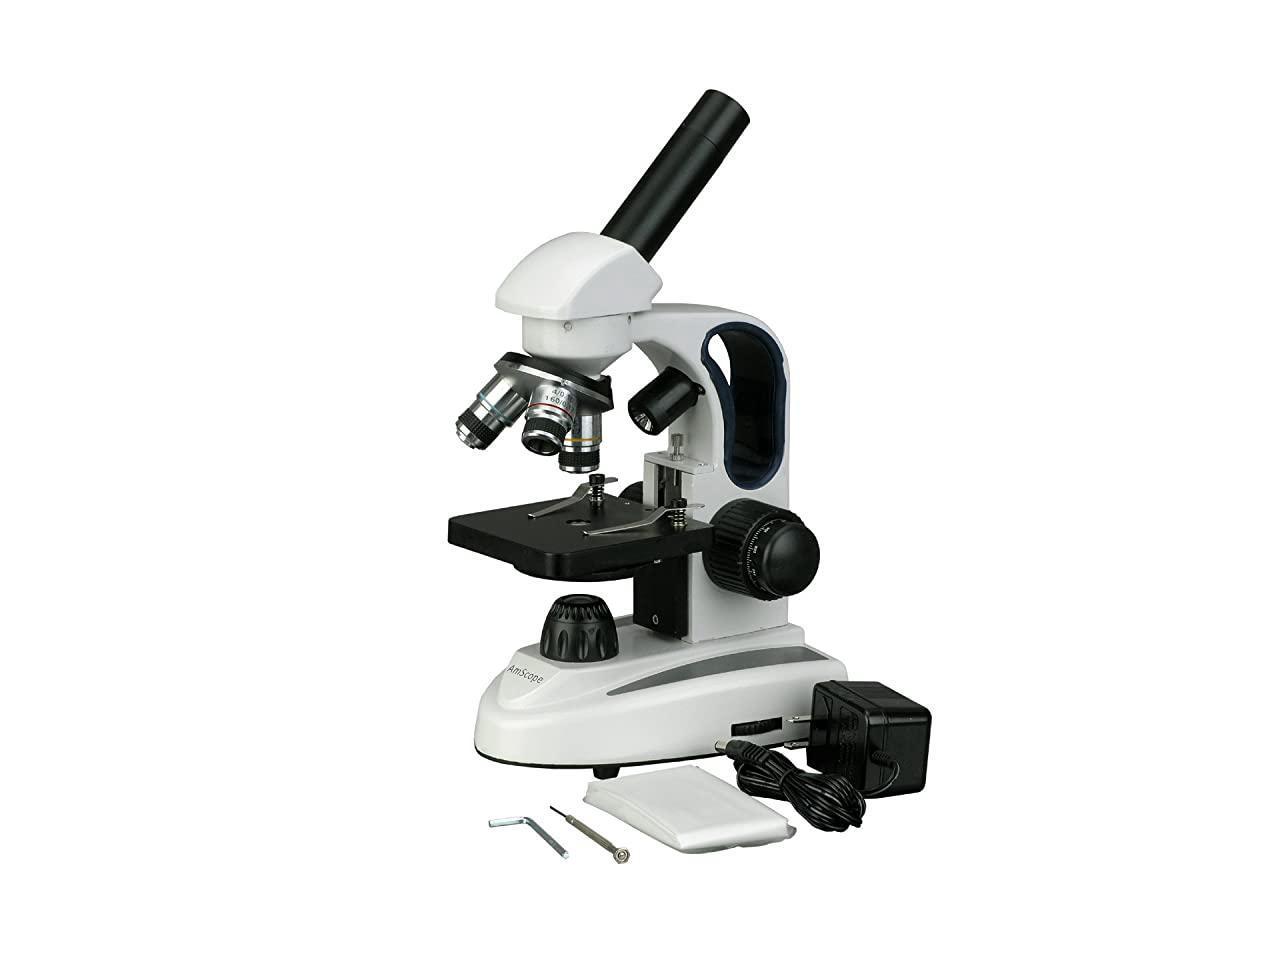 Coaxial Coarse and Fine Focus AmScope M158C-2L Cordless Compound Monocular Microscope Upper and Lower LED Illumination with Rheostat WF10x and WF25x Eyepieces 40x-1000x Magnification 110V or Battery-Pow Single-Lens Condenser Plain Stage Brightfield